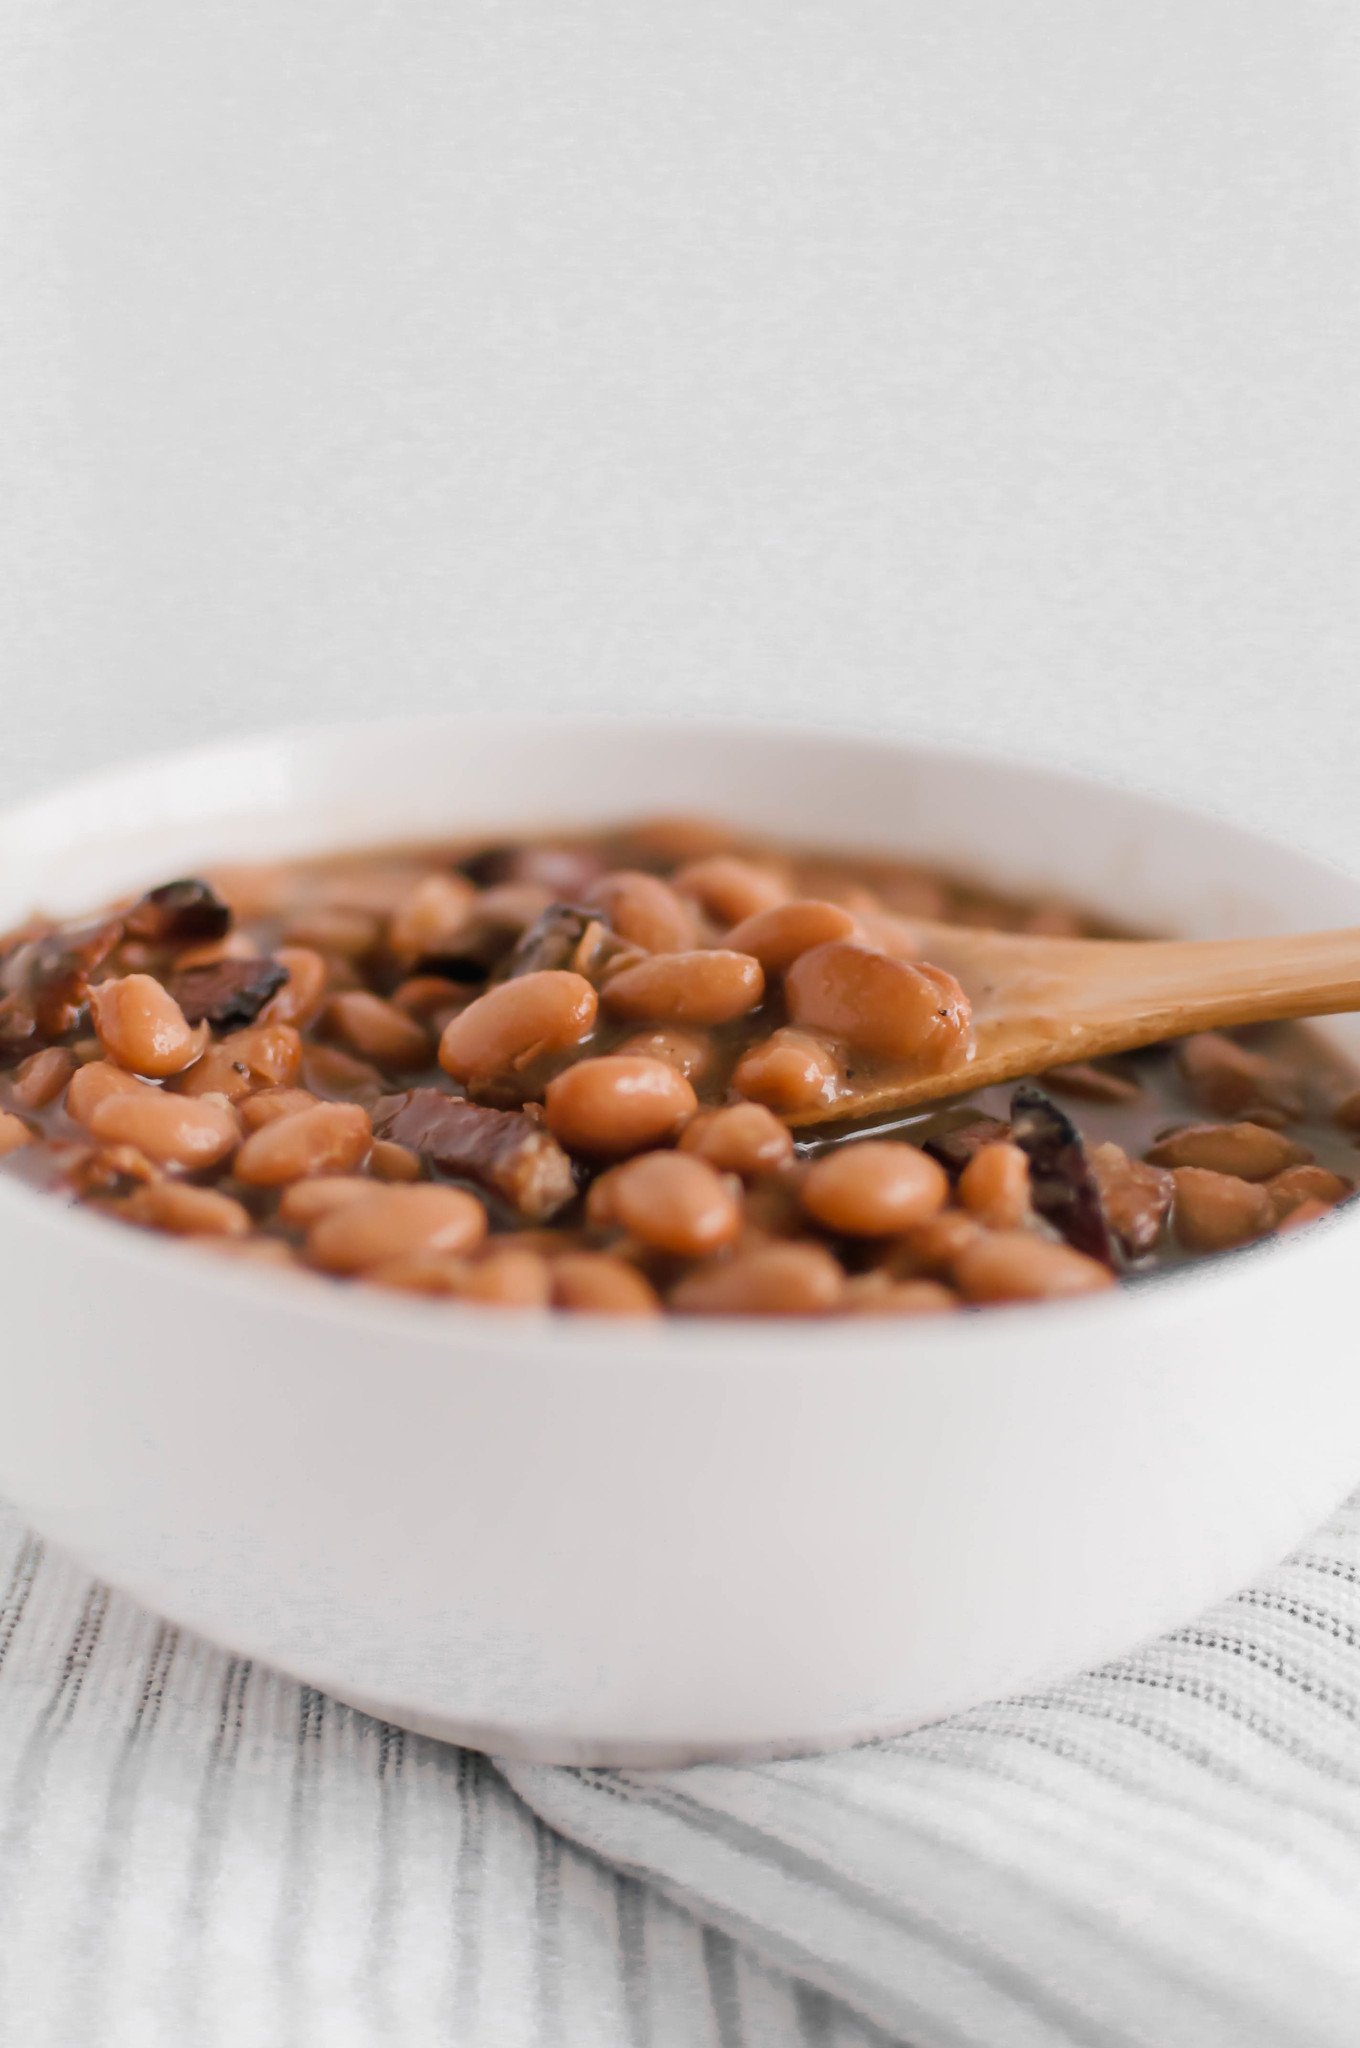 If you love Chipotle's pinto beans, look no further because now you can make them at home. Dried pinto beans cook all day in the slow cooker with bacon, onion and garlic to make these flavorful Bacon Pinto Beans. Perfect for rice bowls, nacho night or even on their own.